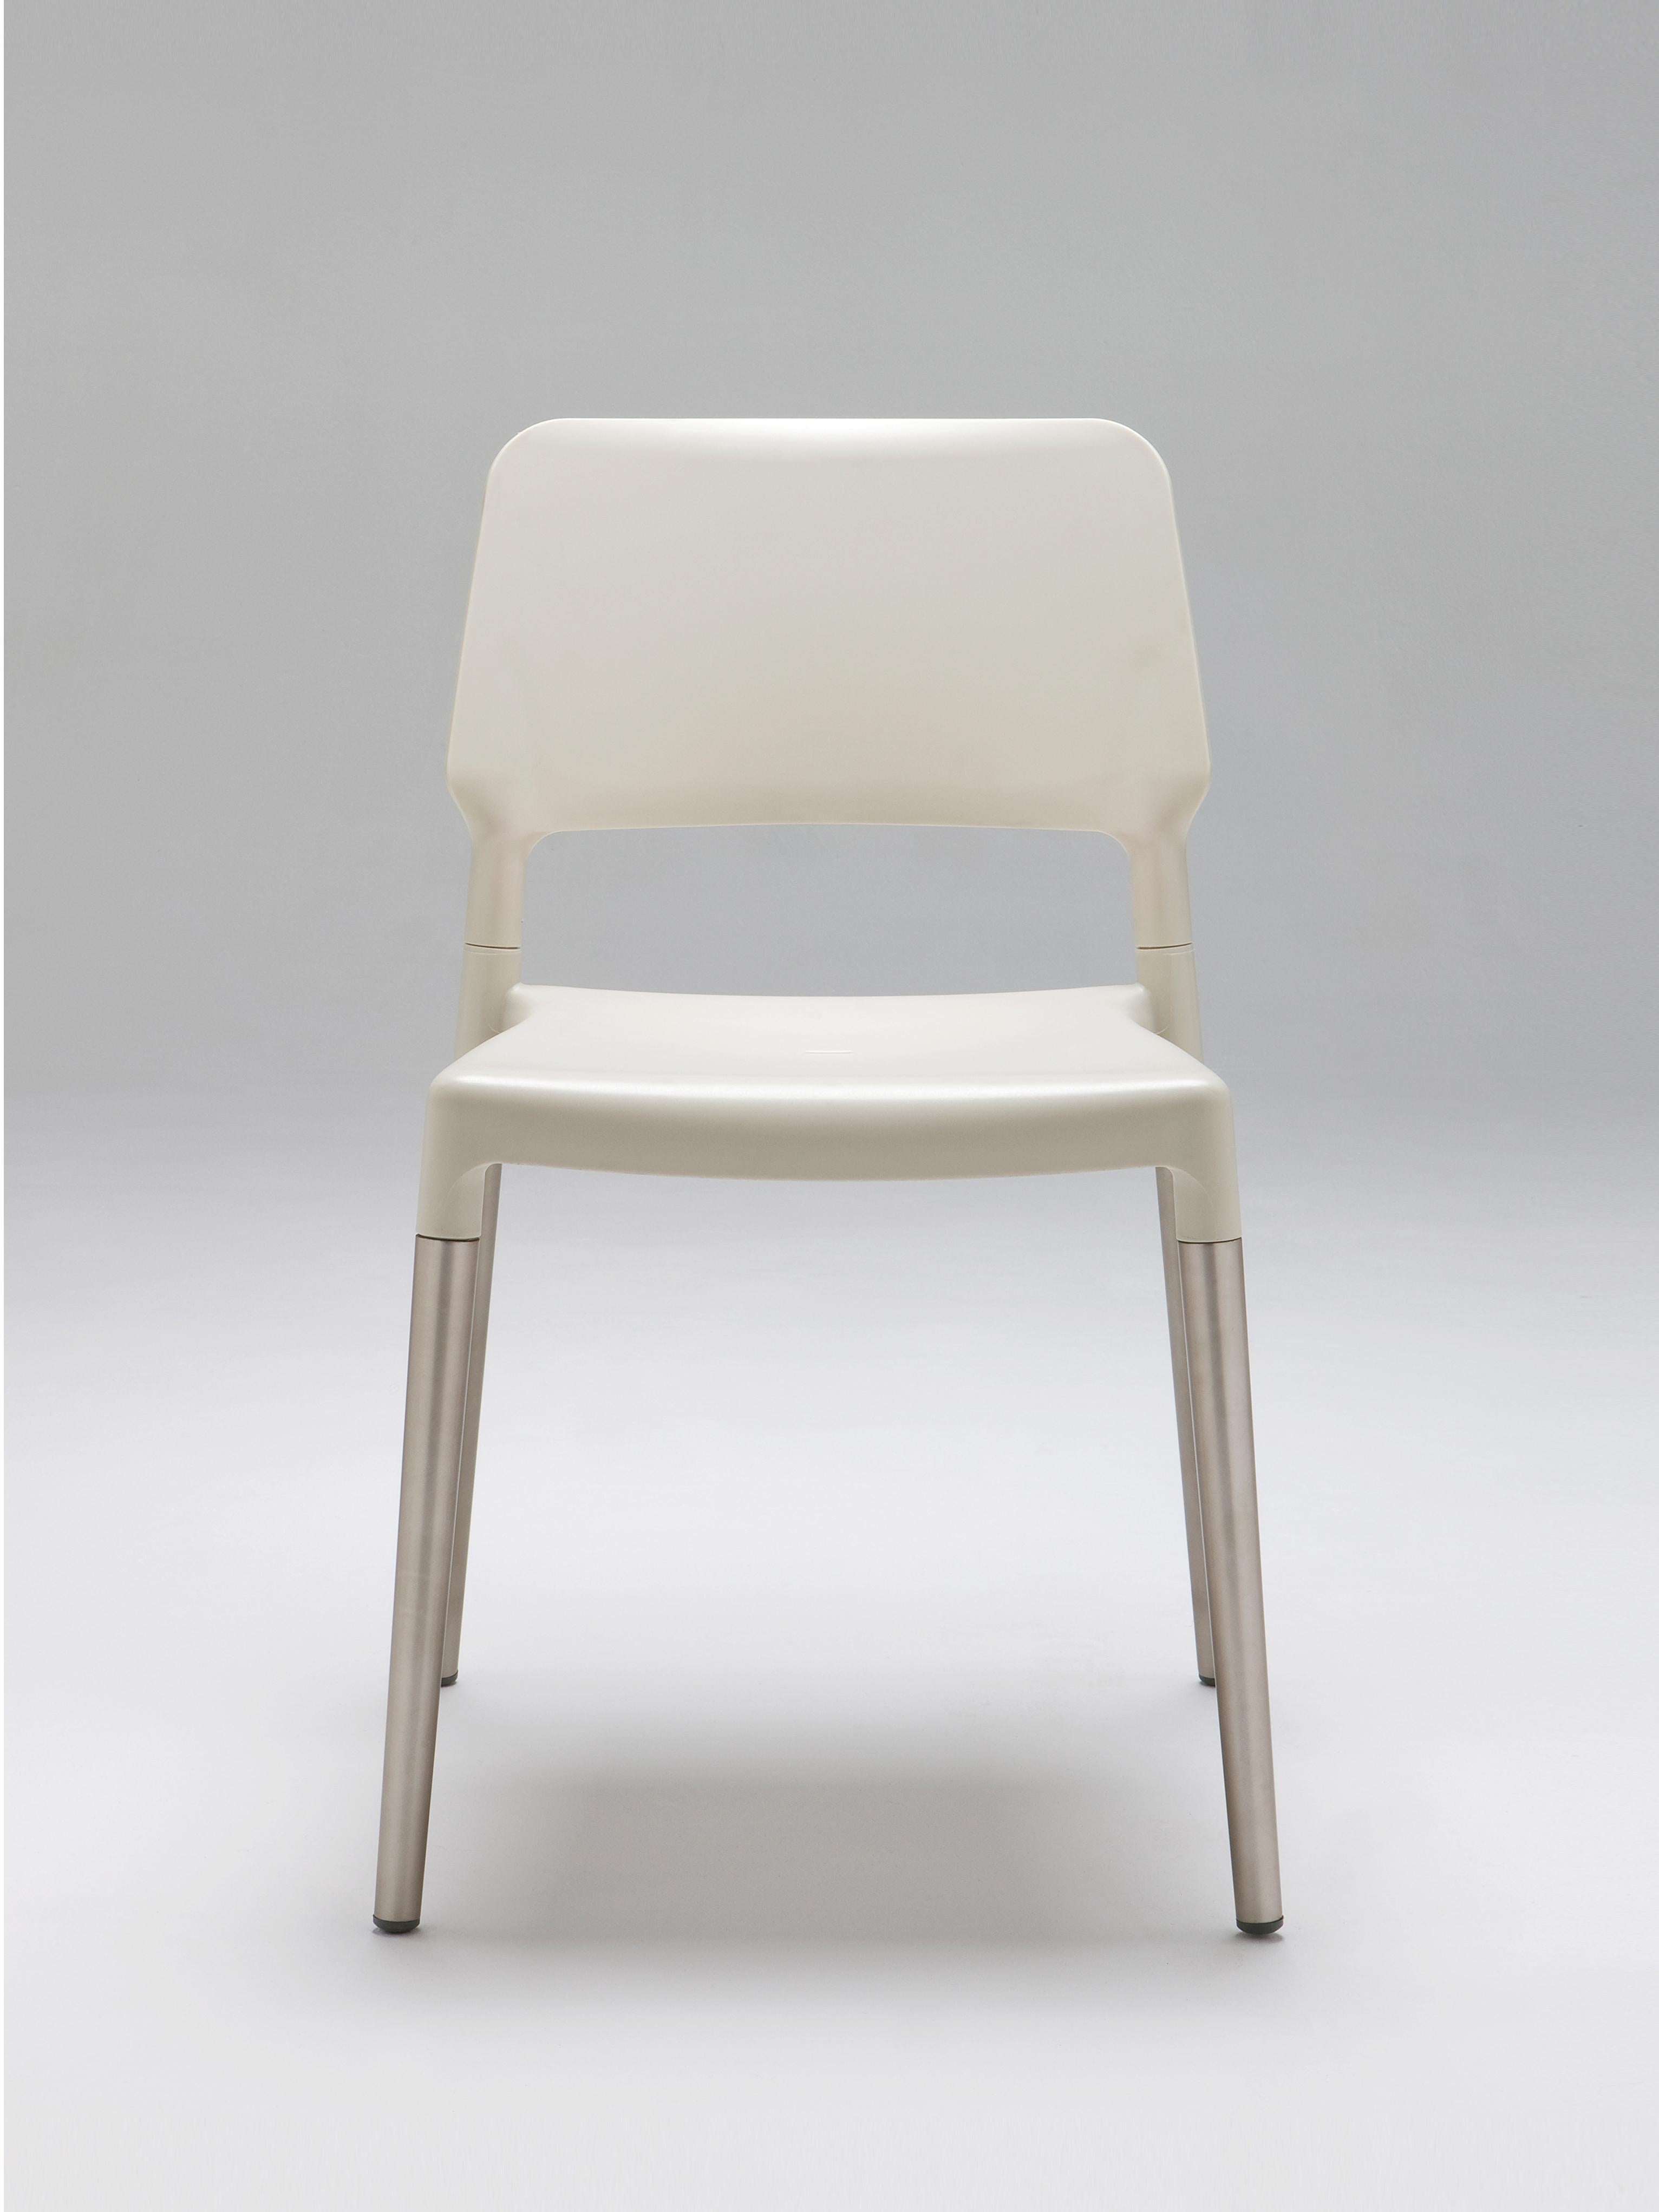 Set of 4 aluminum Belloch dining chair by Lagranja Design
Dimensions: D 50 x W 54 x H 79 cm
Materials: Aluminum, polypropylene, fiberglass.

The Belloch chair is the result of commissioning a lightweight and stackable design. Combining various